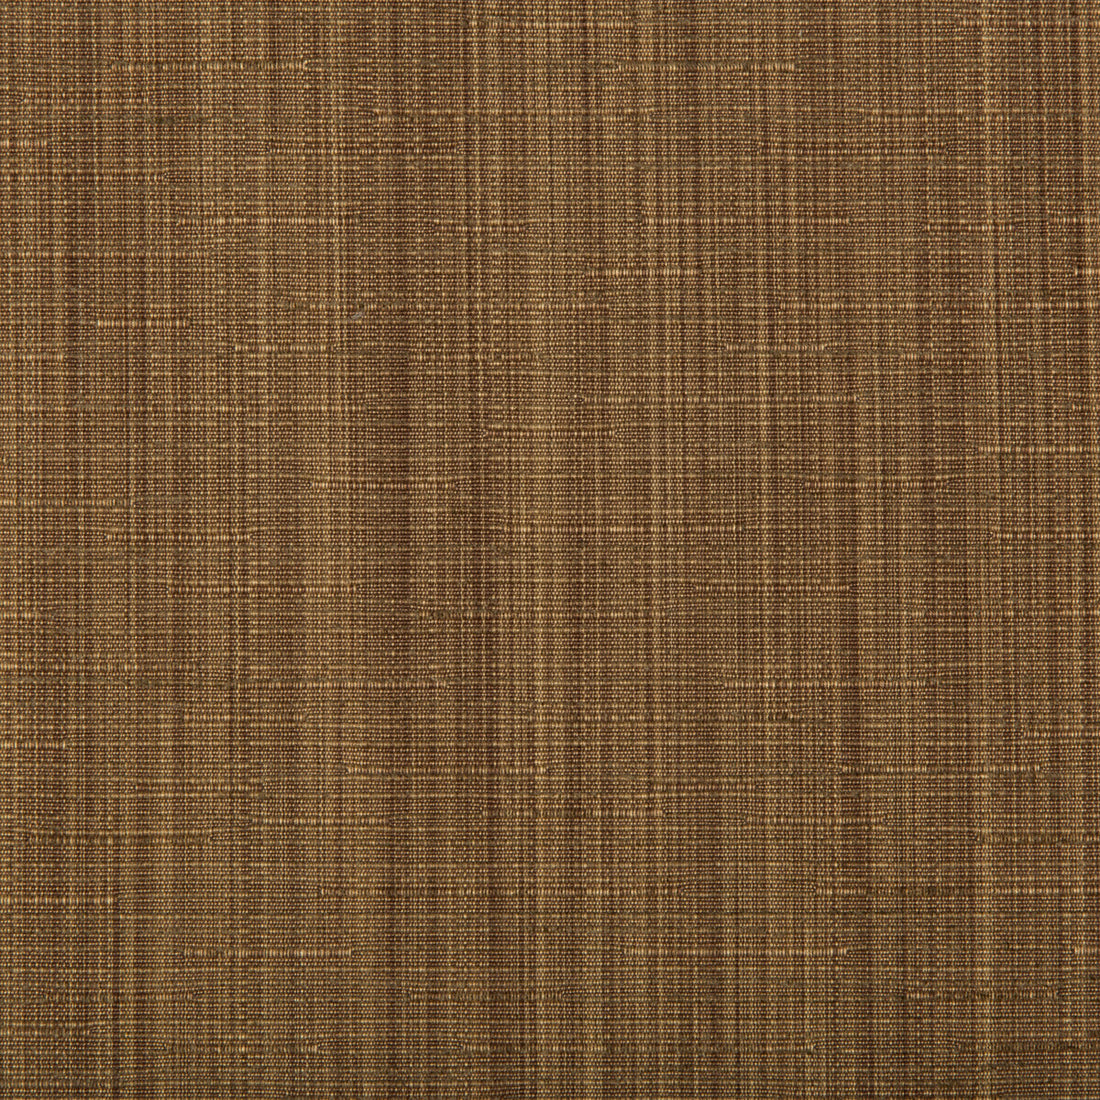 Somerset Strie fabric in espresso color - pattern 2018150.616.0 - by Lee Jofa in the Somerset Strie collection